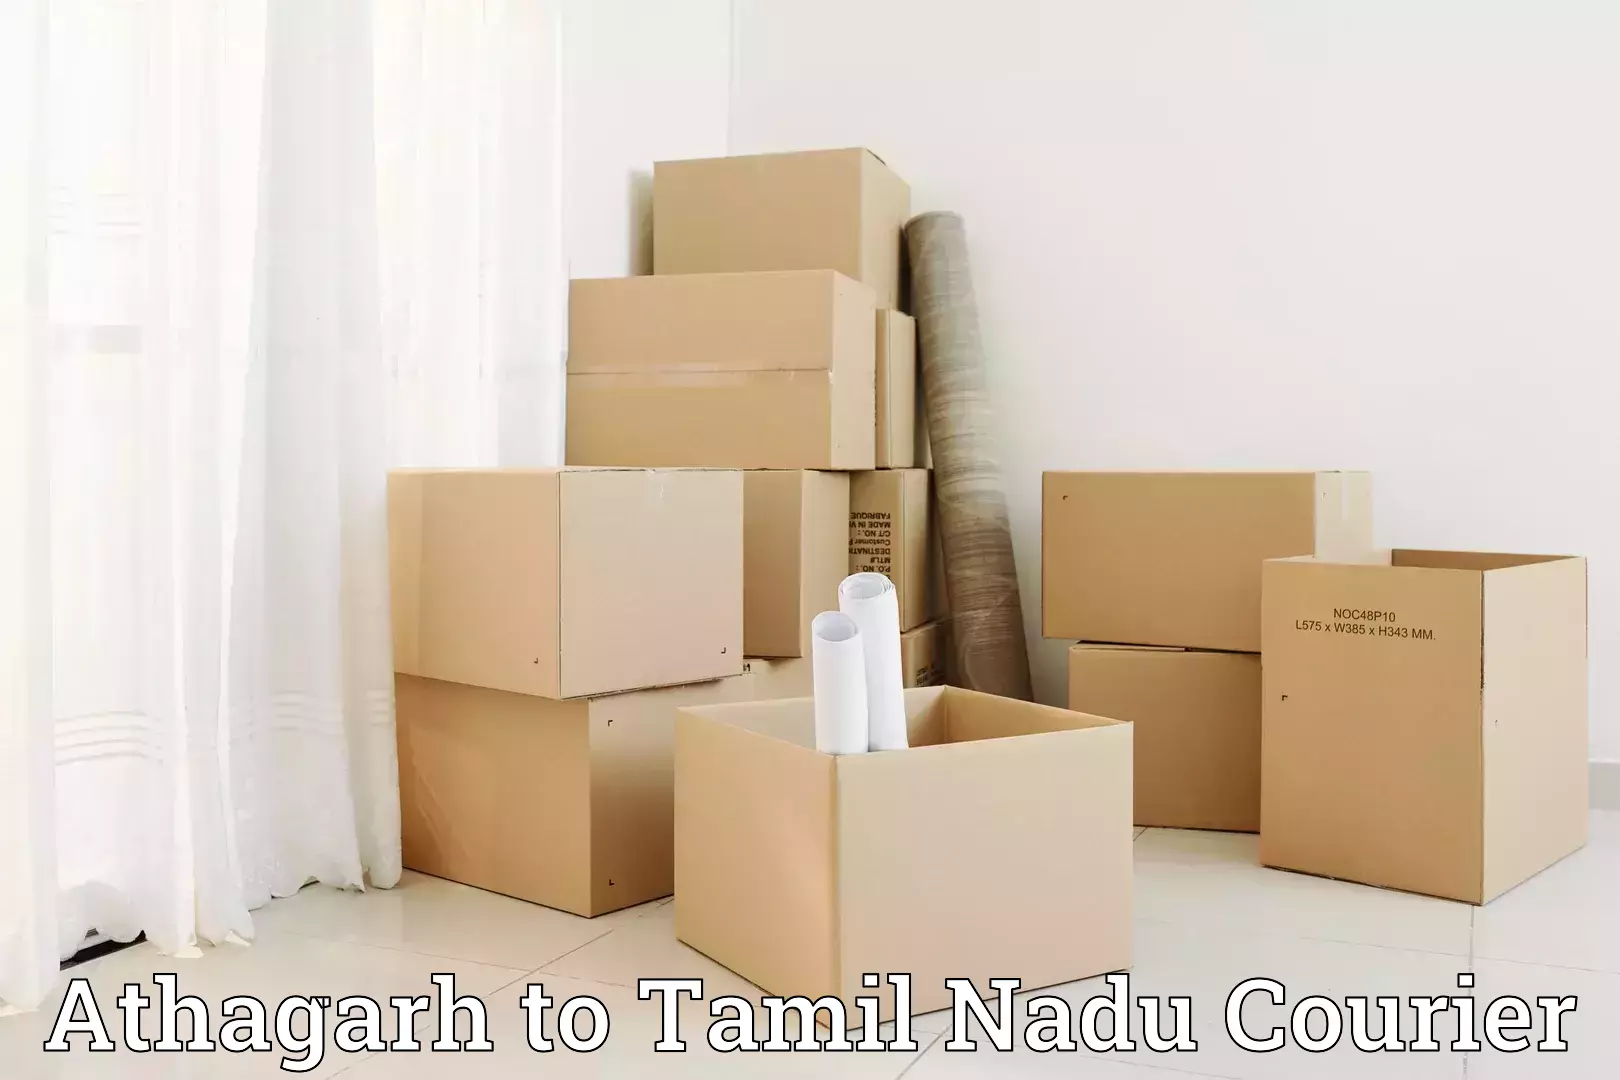 Furniture transport company Athagarh to Trichy